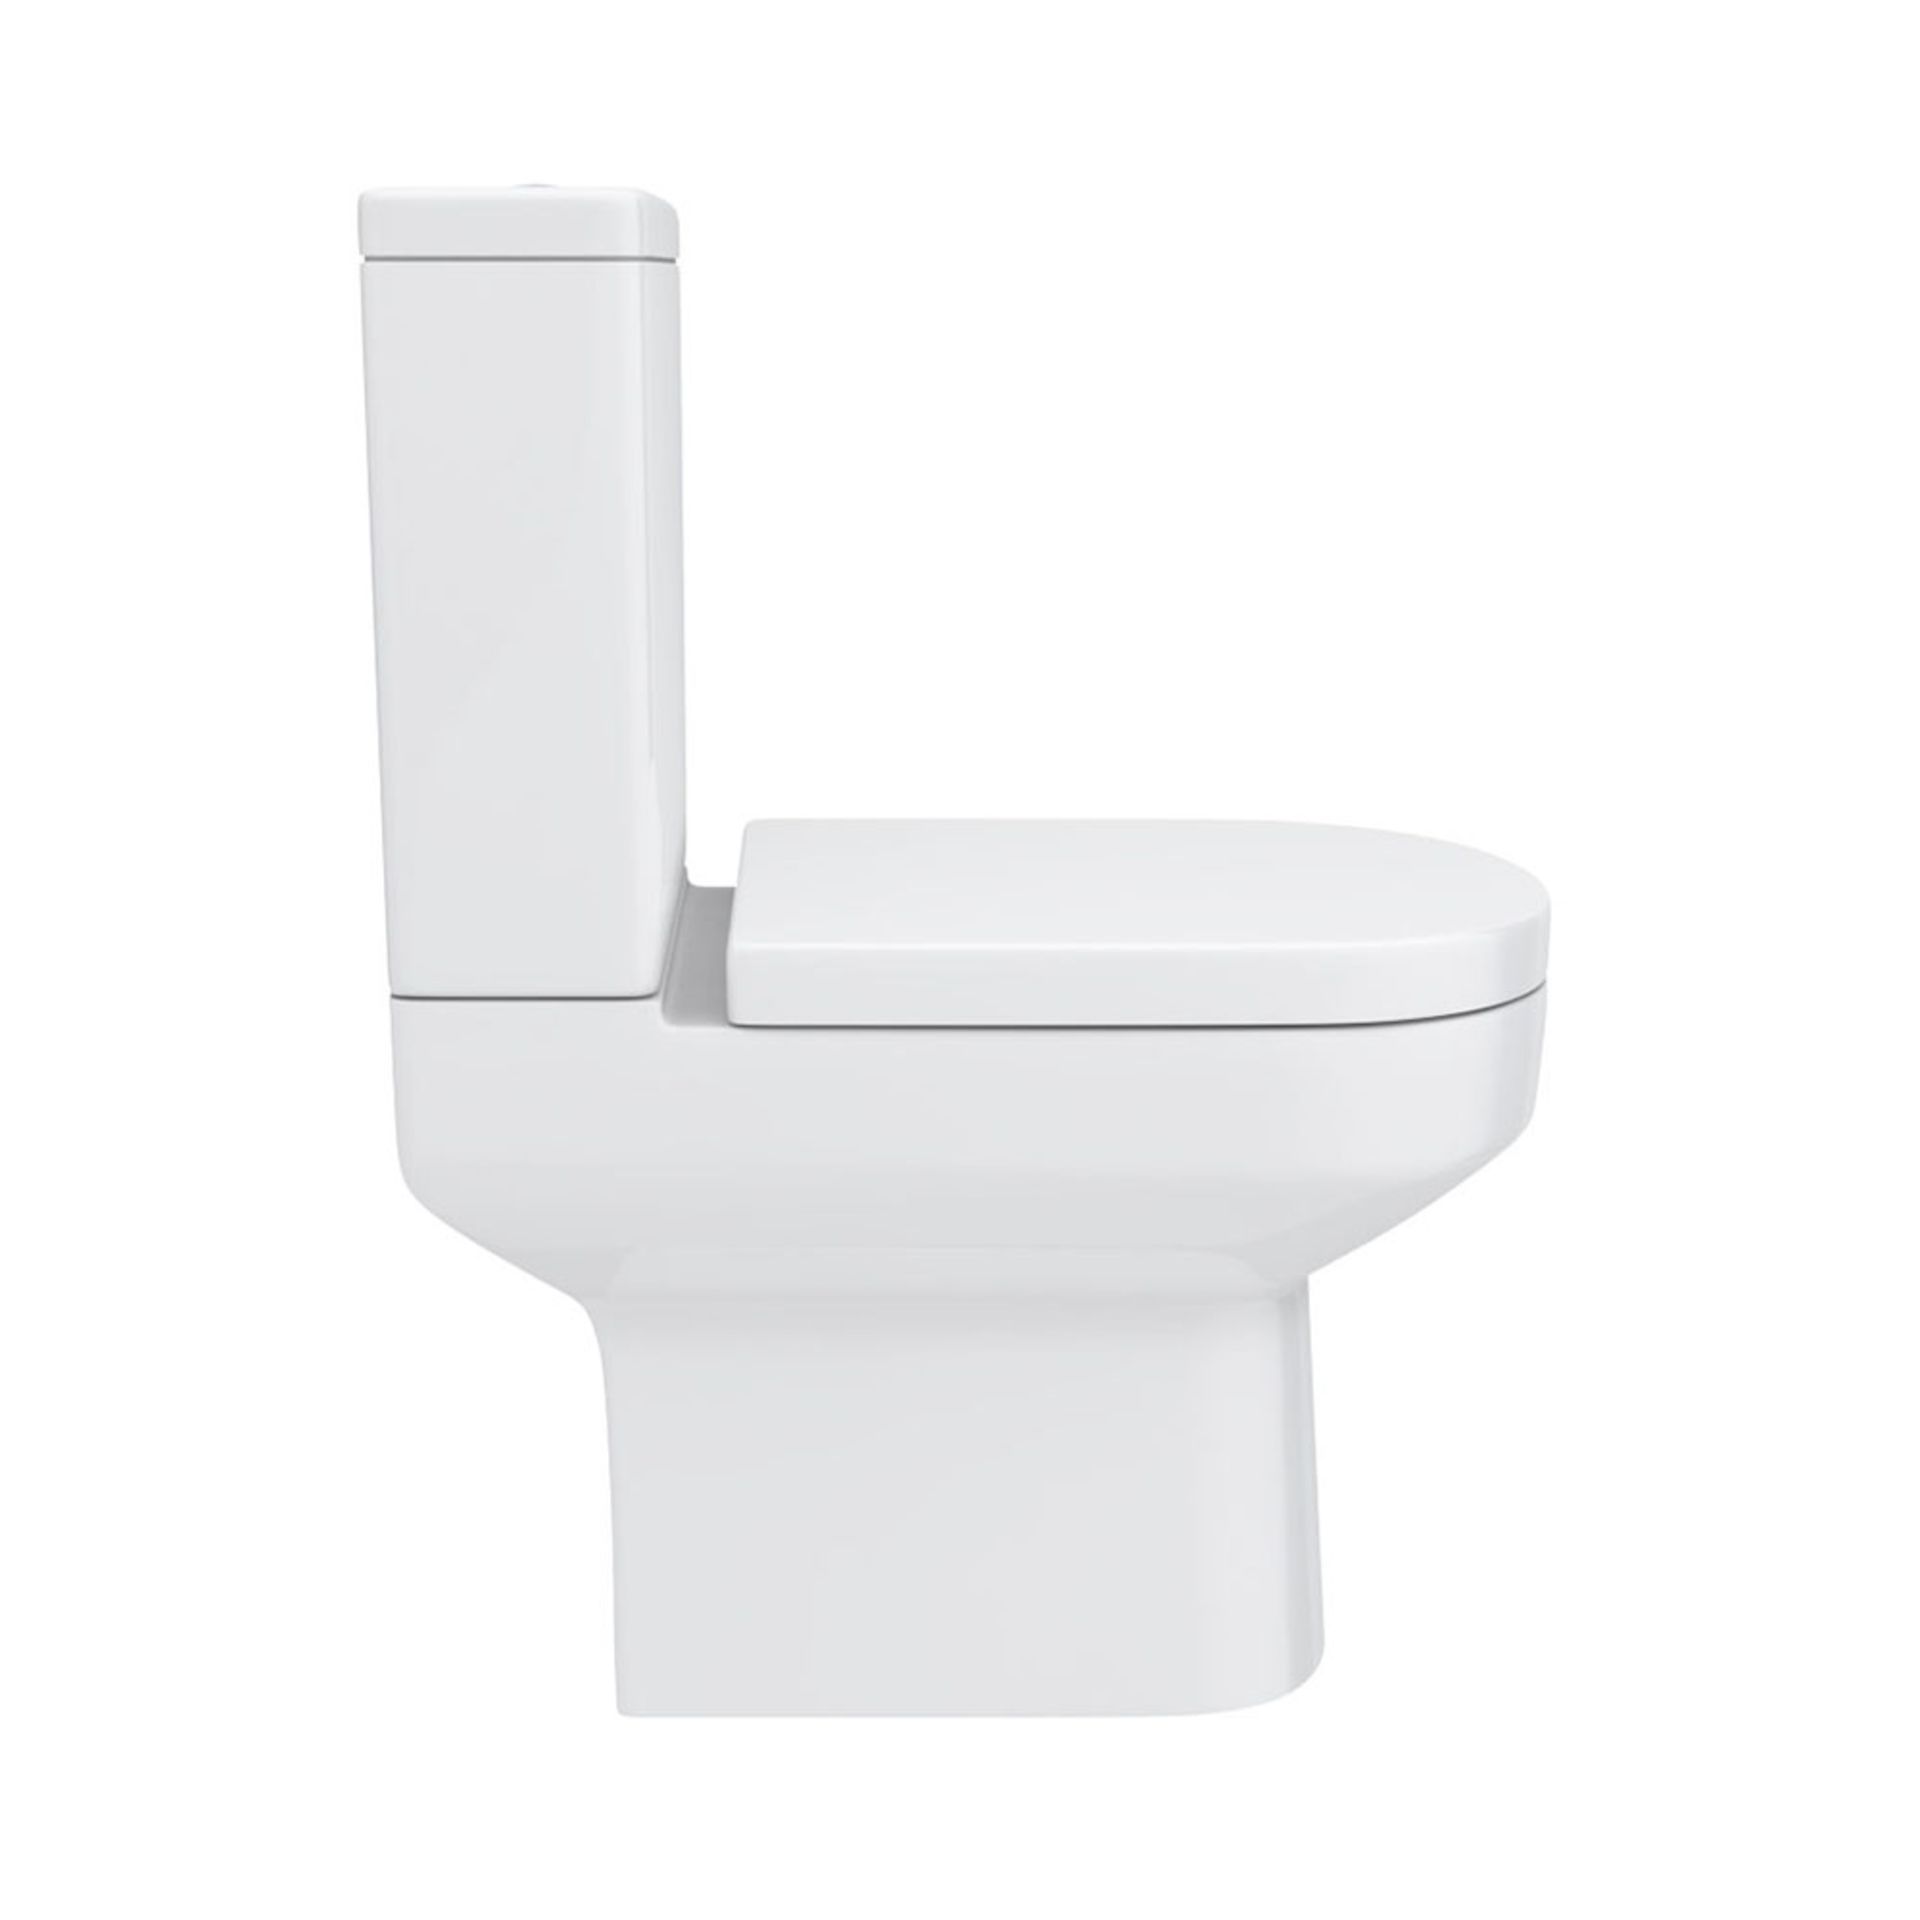 Metro short projection close coupled toilet pan with seat and dual flush cistern kit. IC506 - Image 3 of 4